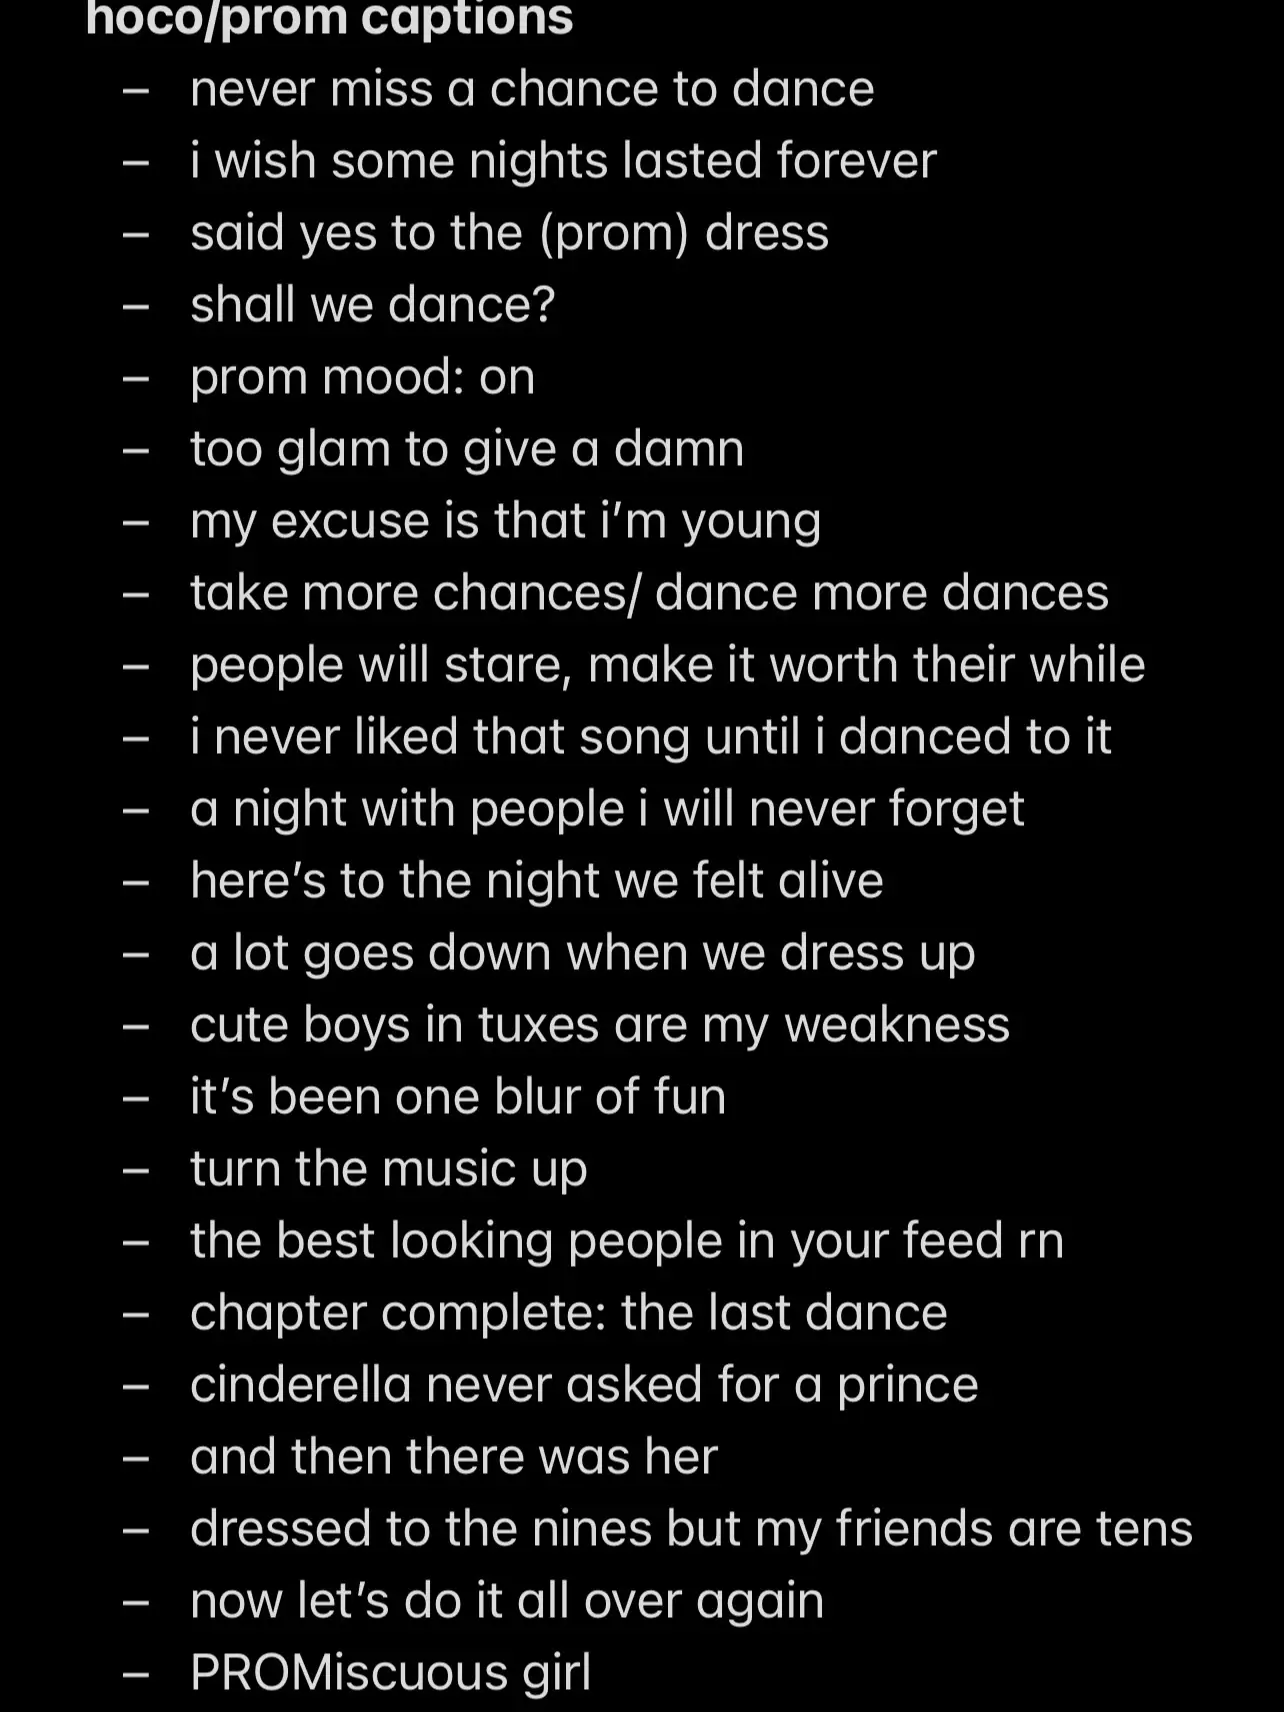  A list of things to do before prom.